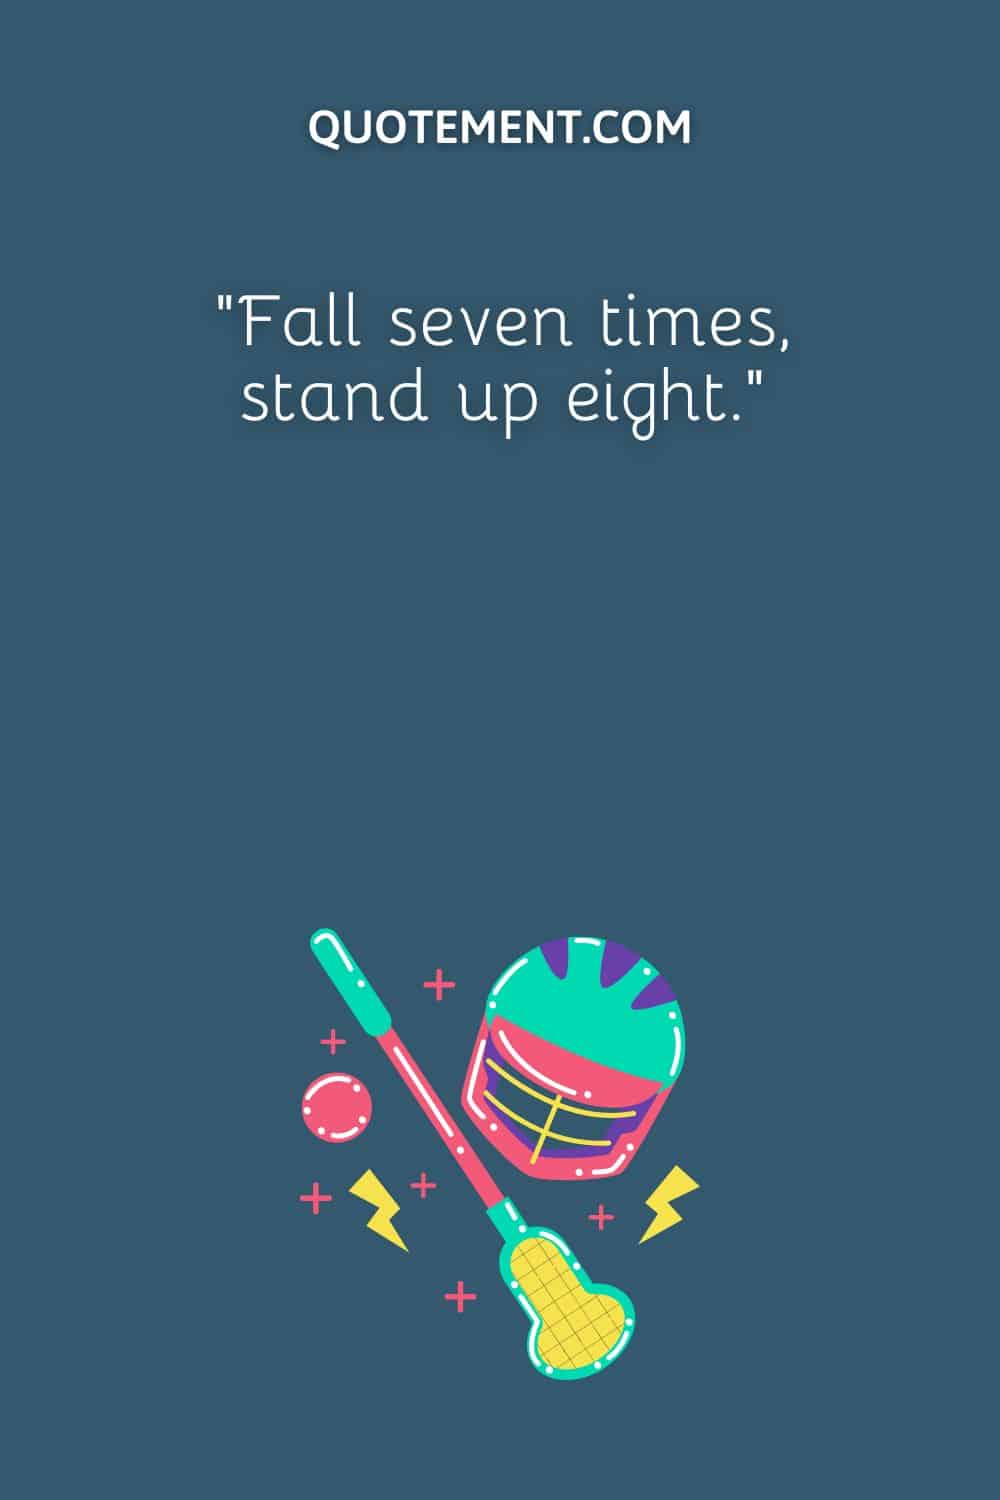 “Fall seven times, stand up eight.”